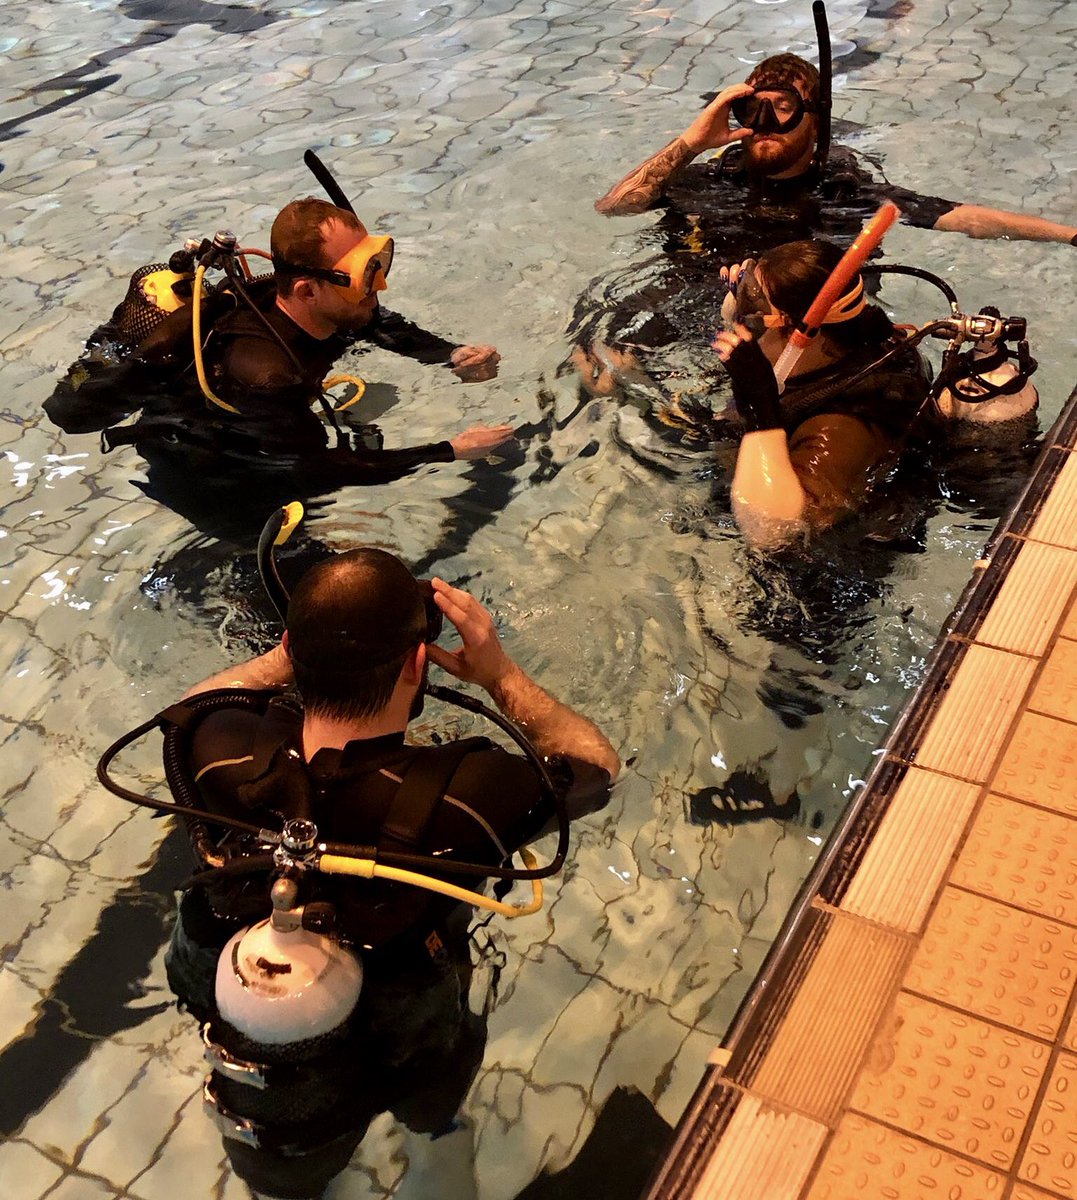 🎉 Congratulations to all our students who took to the pool tonight! 🌊 Well done Tomasz, Ross, Erin, Sally and Matt - great progress on your open water course! Hayden and Leigh completed their scuba review and Jasper completed some more Drysuit practice!